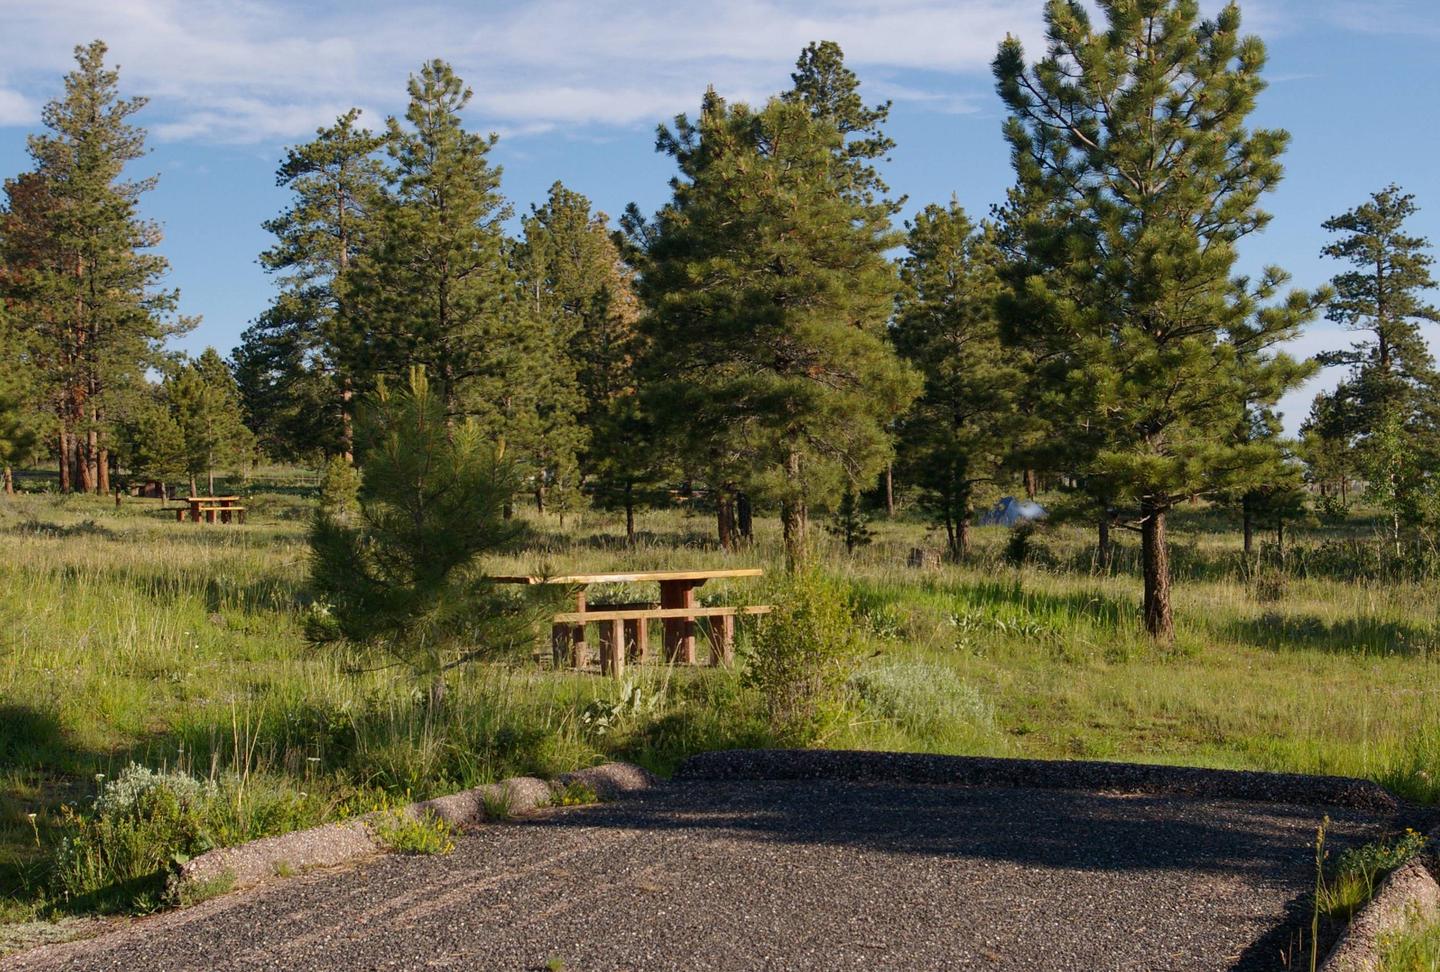 This site has a picnic table and grill in a grassy area to the back of the parking slot. There are a few trees that are in the background. Canyon Rim Campground